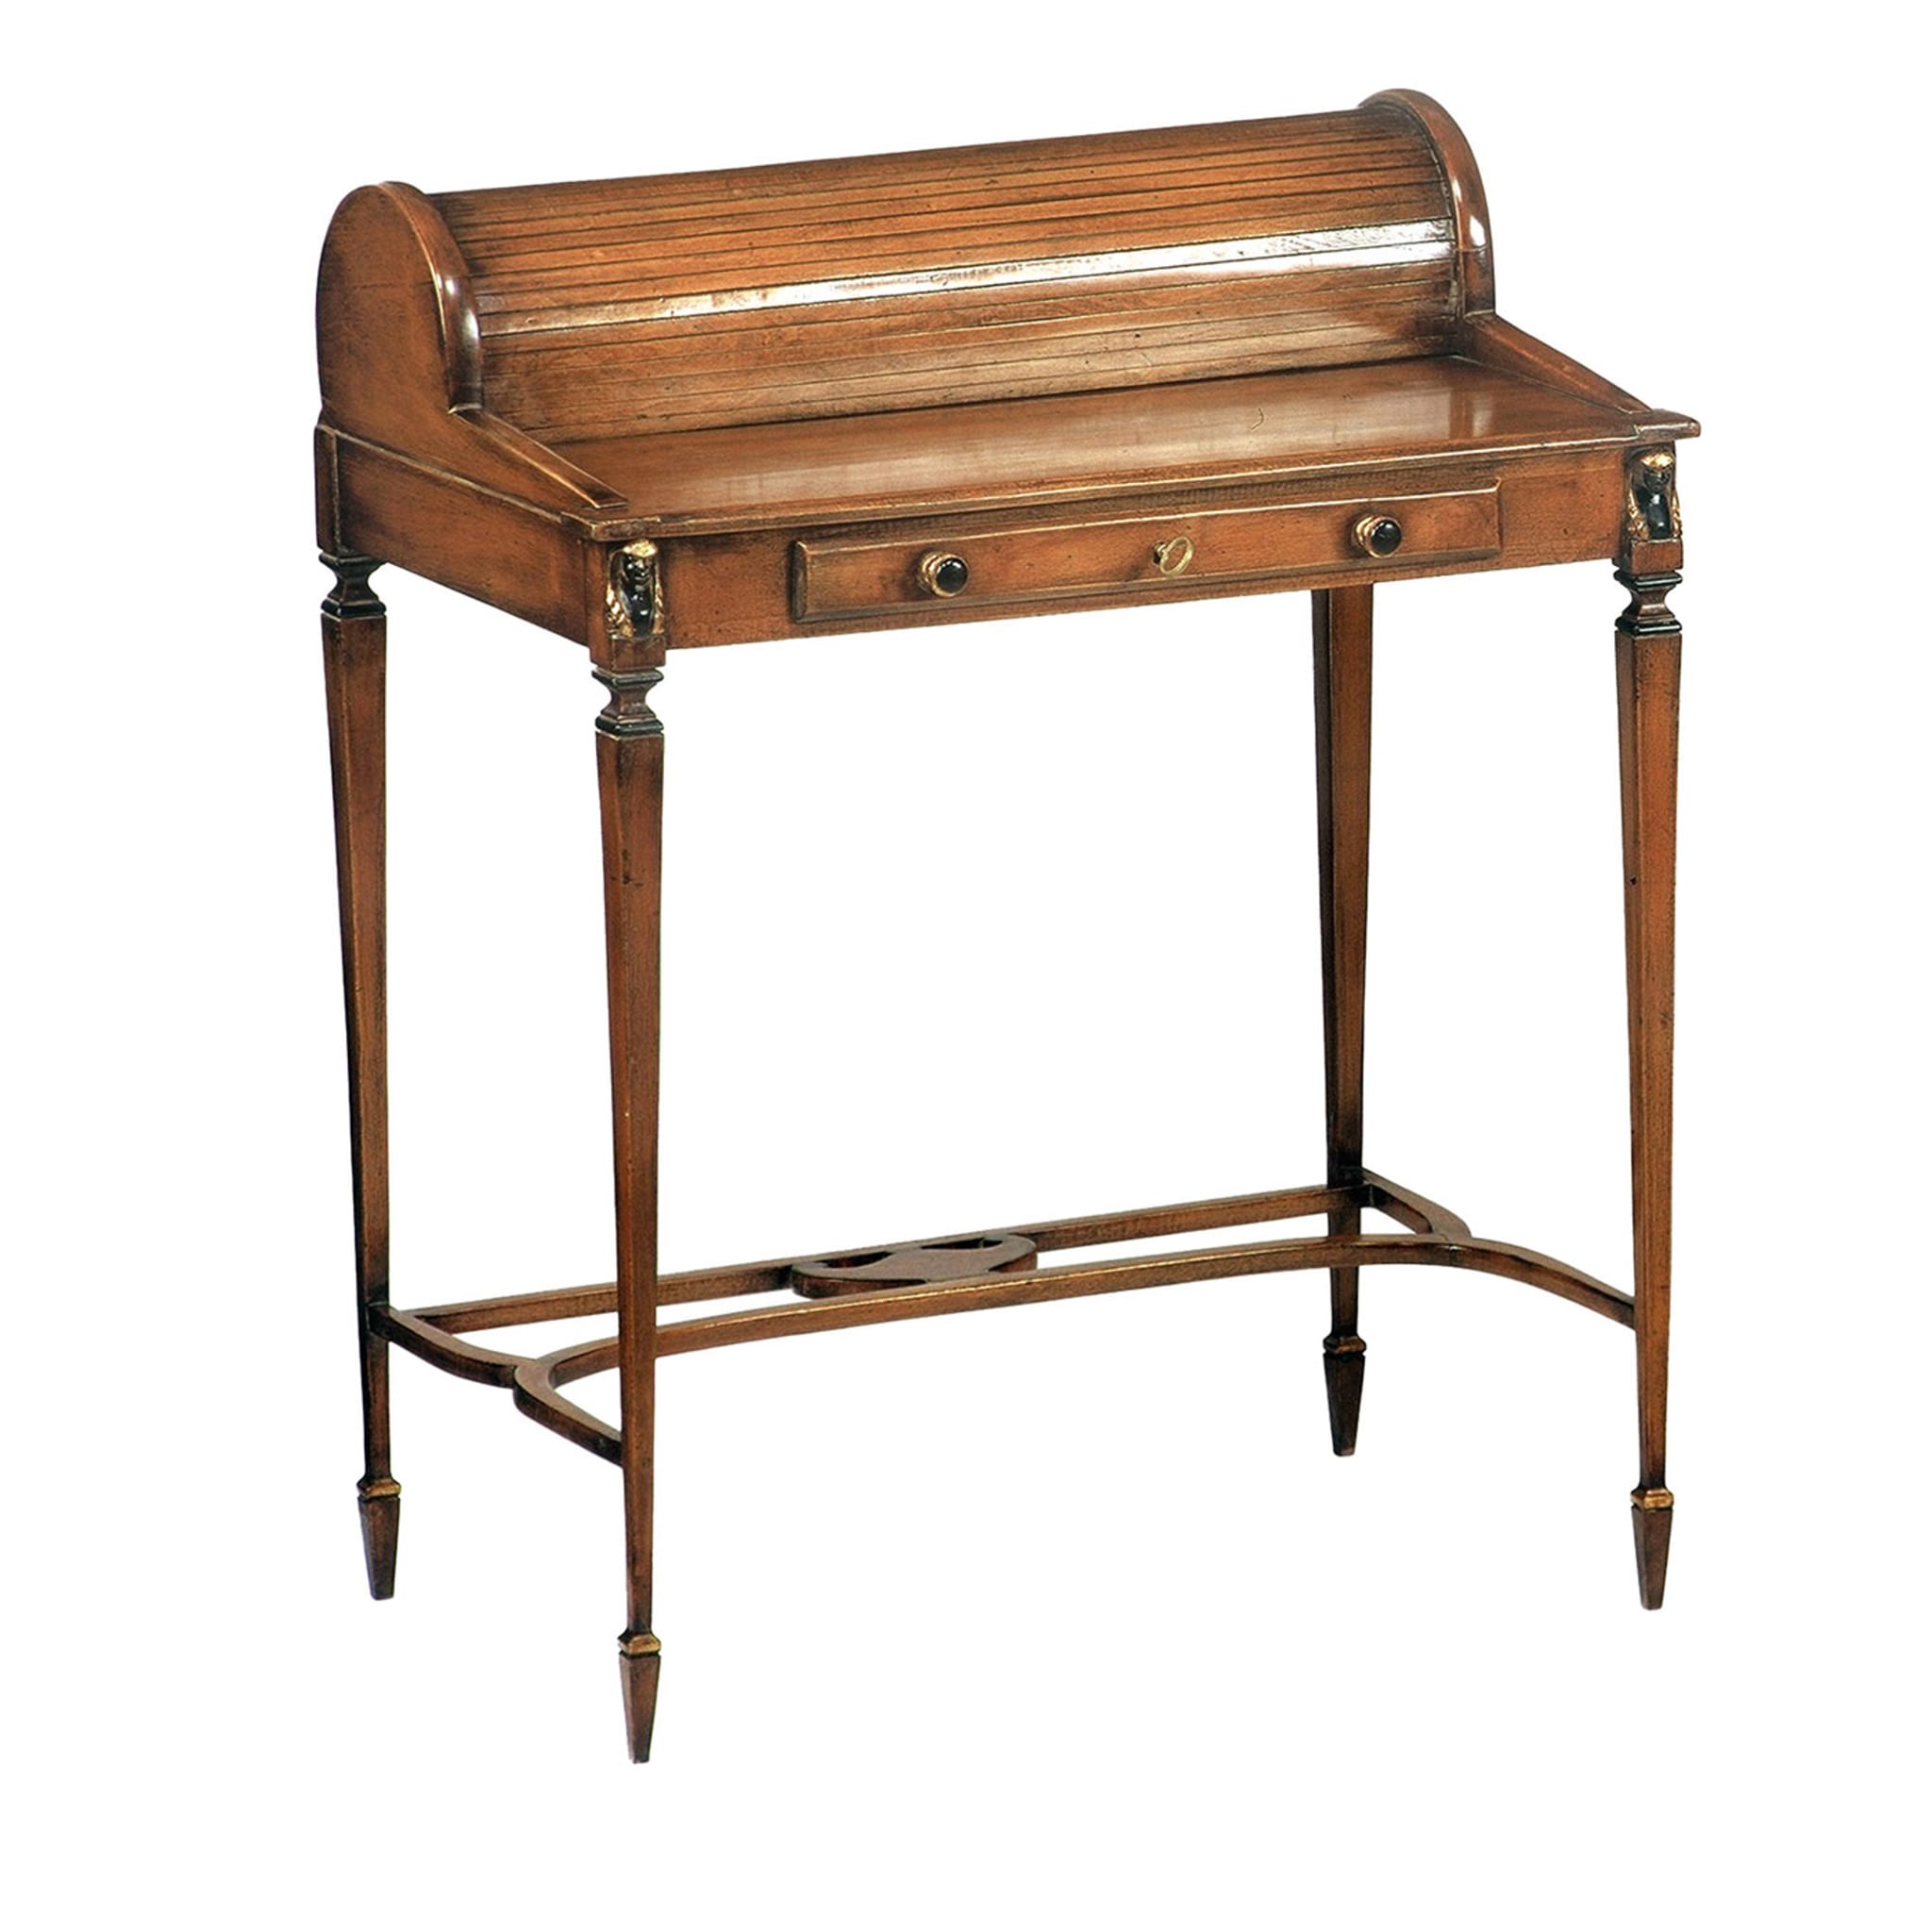 French Empire-Style Roll-Top Writing Desk #1 - Main view